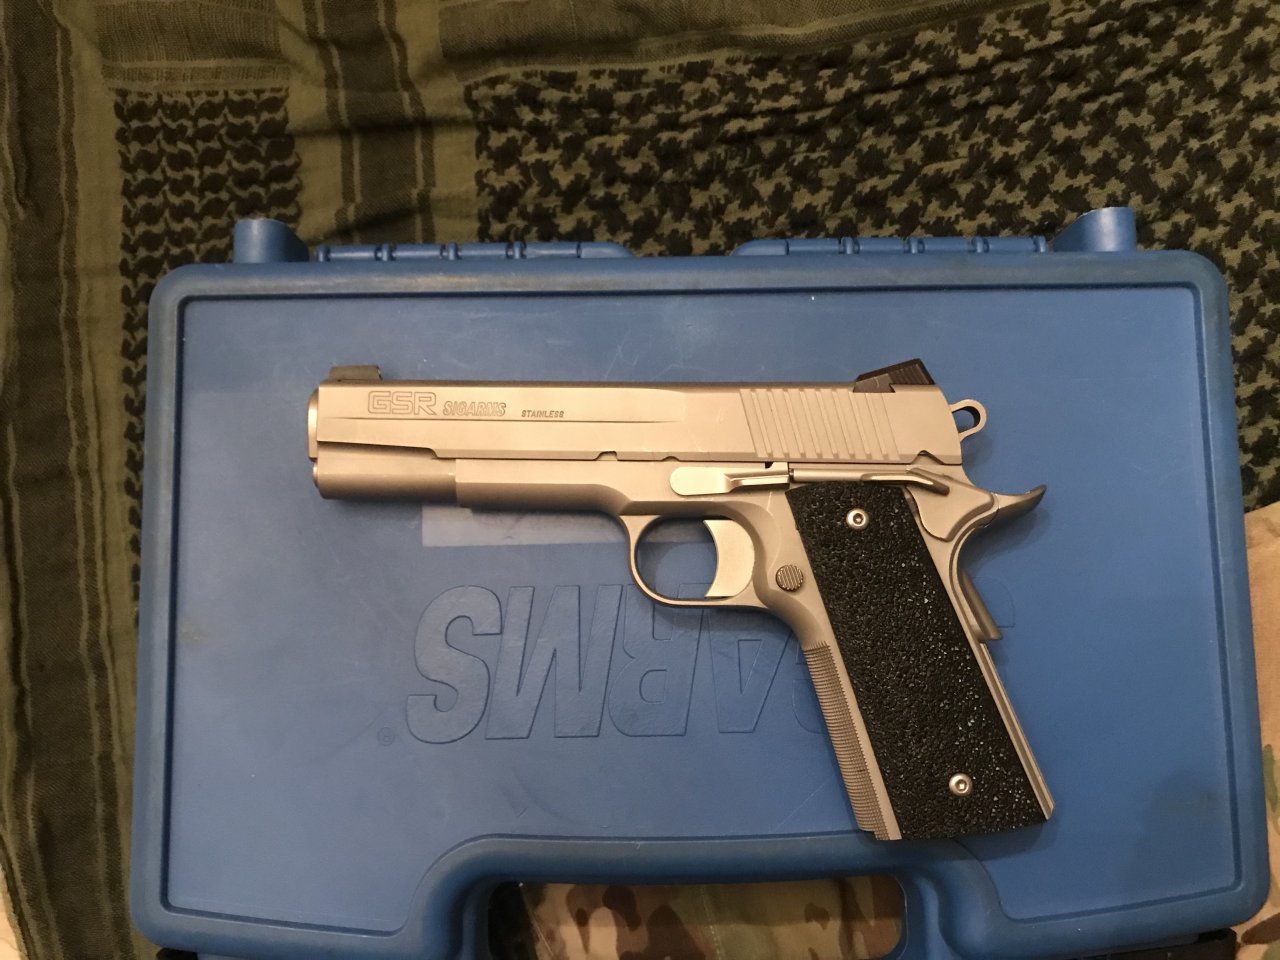 SIG GSR - Stainless - Fair condition - box and papers - $650